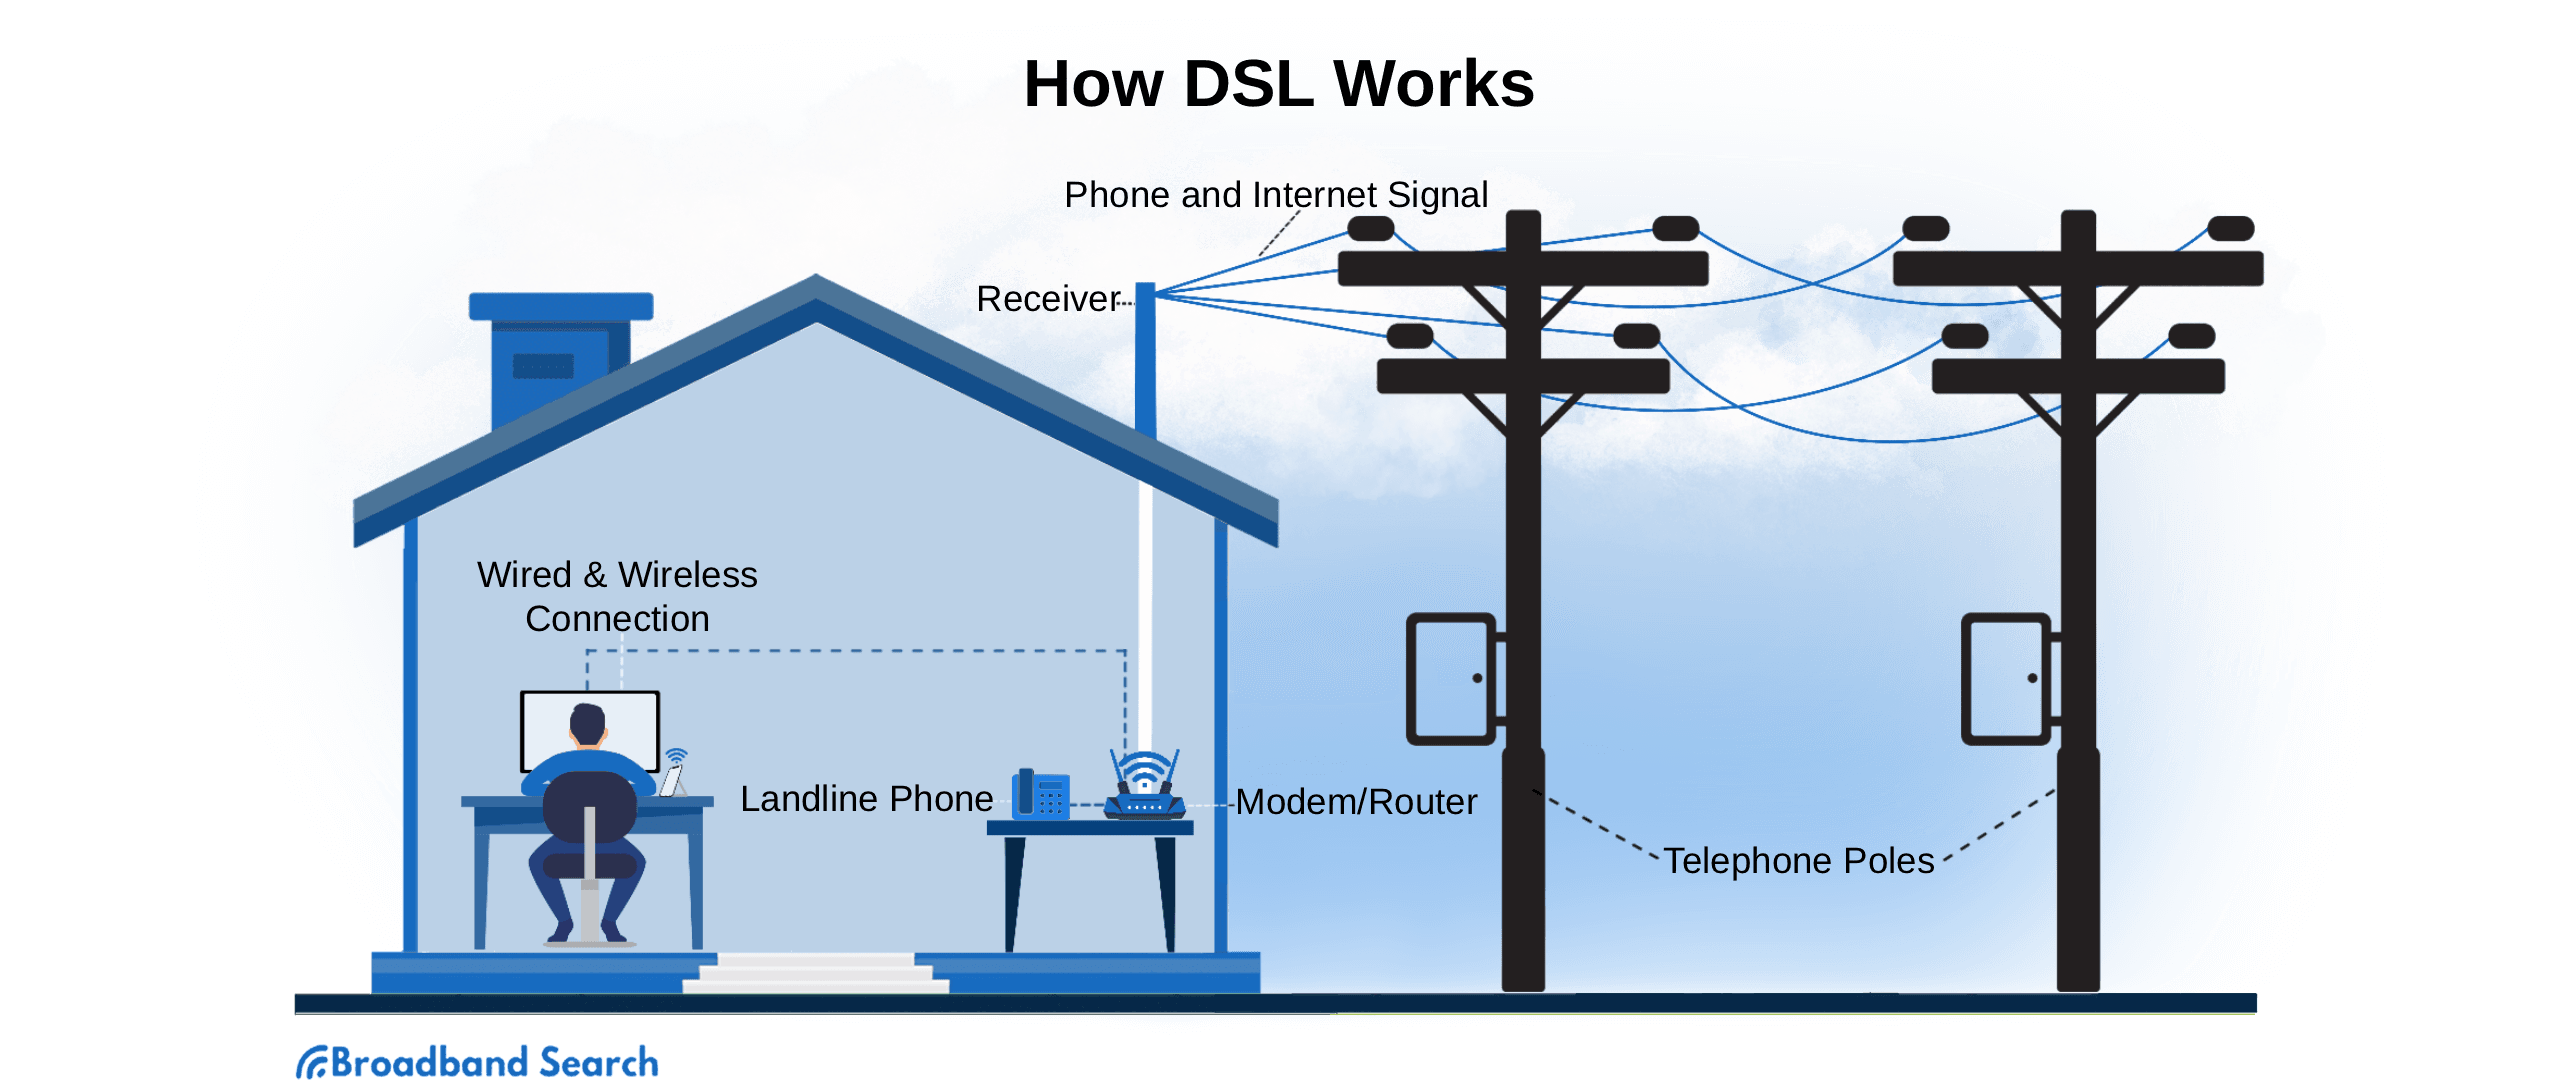 How DSL works